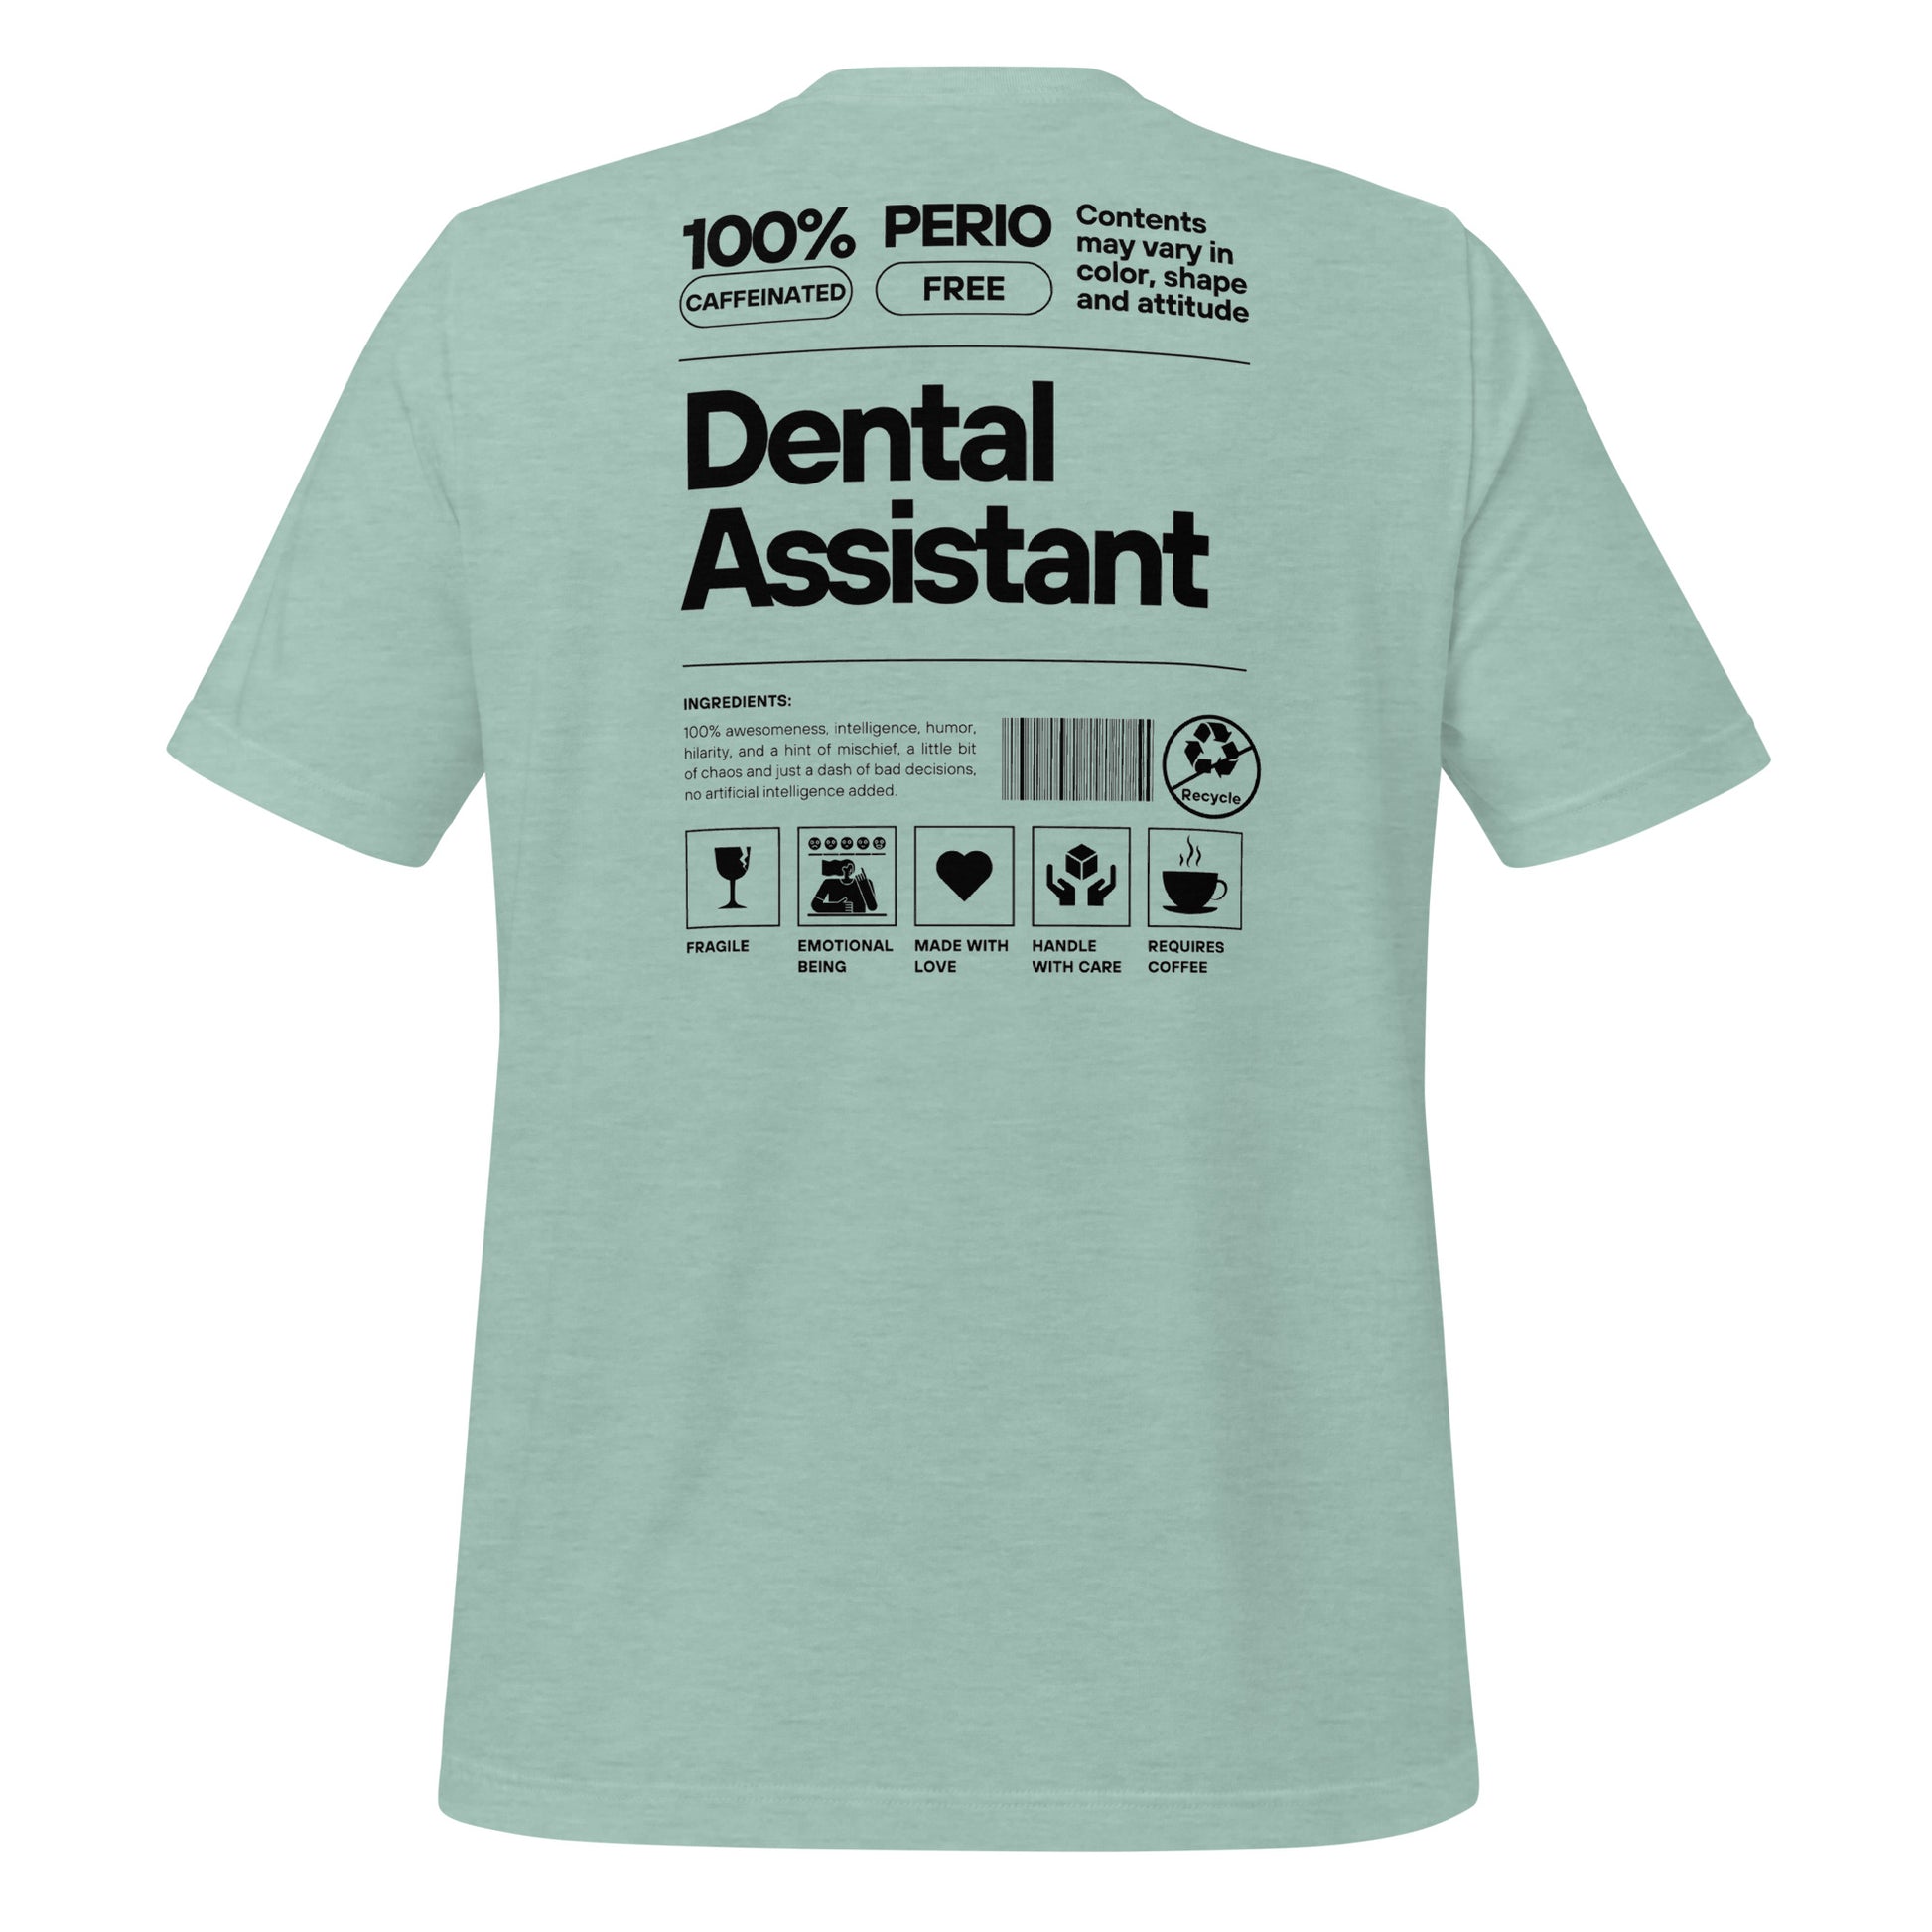 Heather prism dental assistant shirt featuring a creative label design with icons and text, perfect for dental assistants who want to express their identity and passion for their job - dental shirts back view.